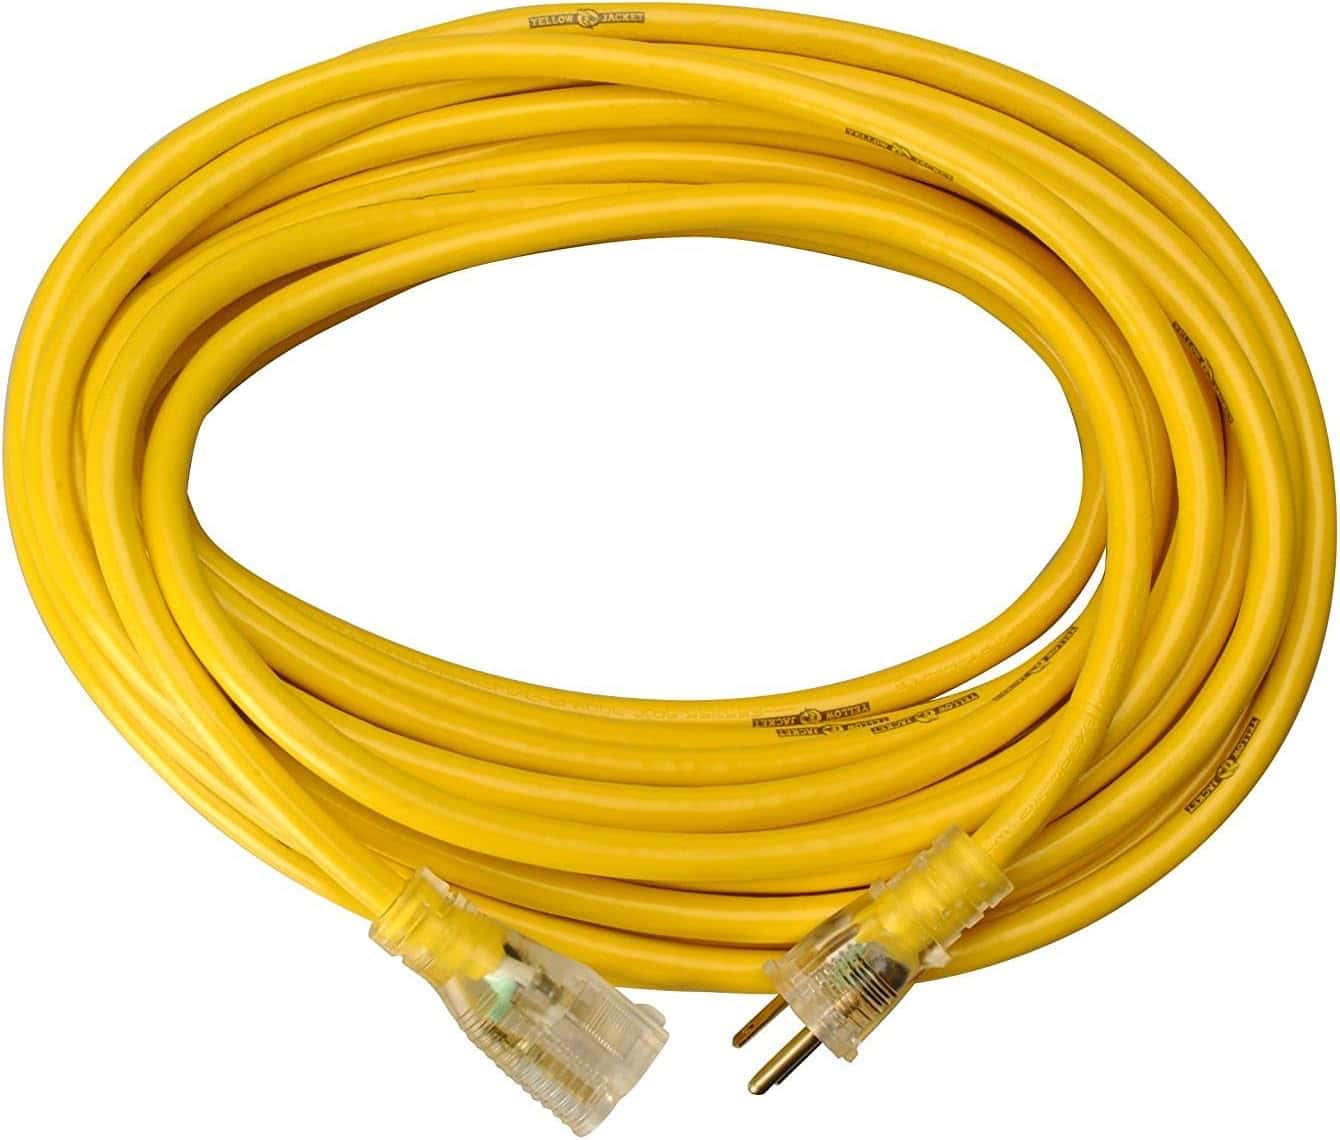 Yellow Jacket 2888 UL Listed 14 3 13 Amp Premium SJTW 100′ (30.5M) Extension Cord with Grounded (3 prong) Lighted Receptacle End 100 Foot Yellow 2